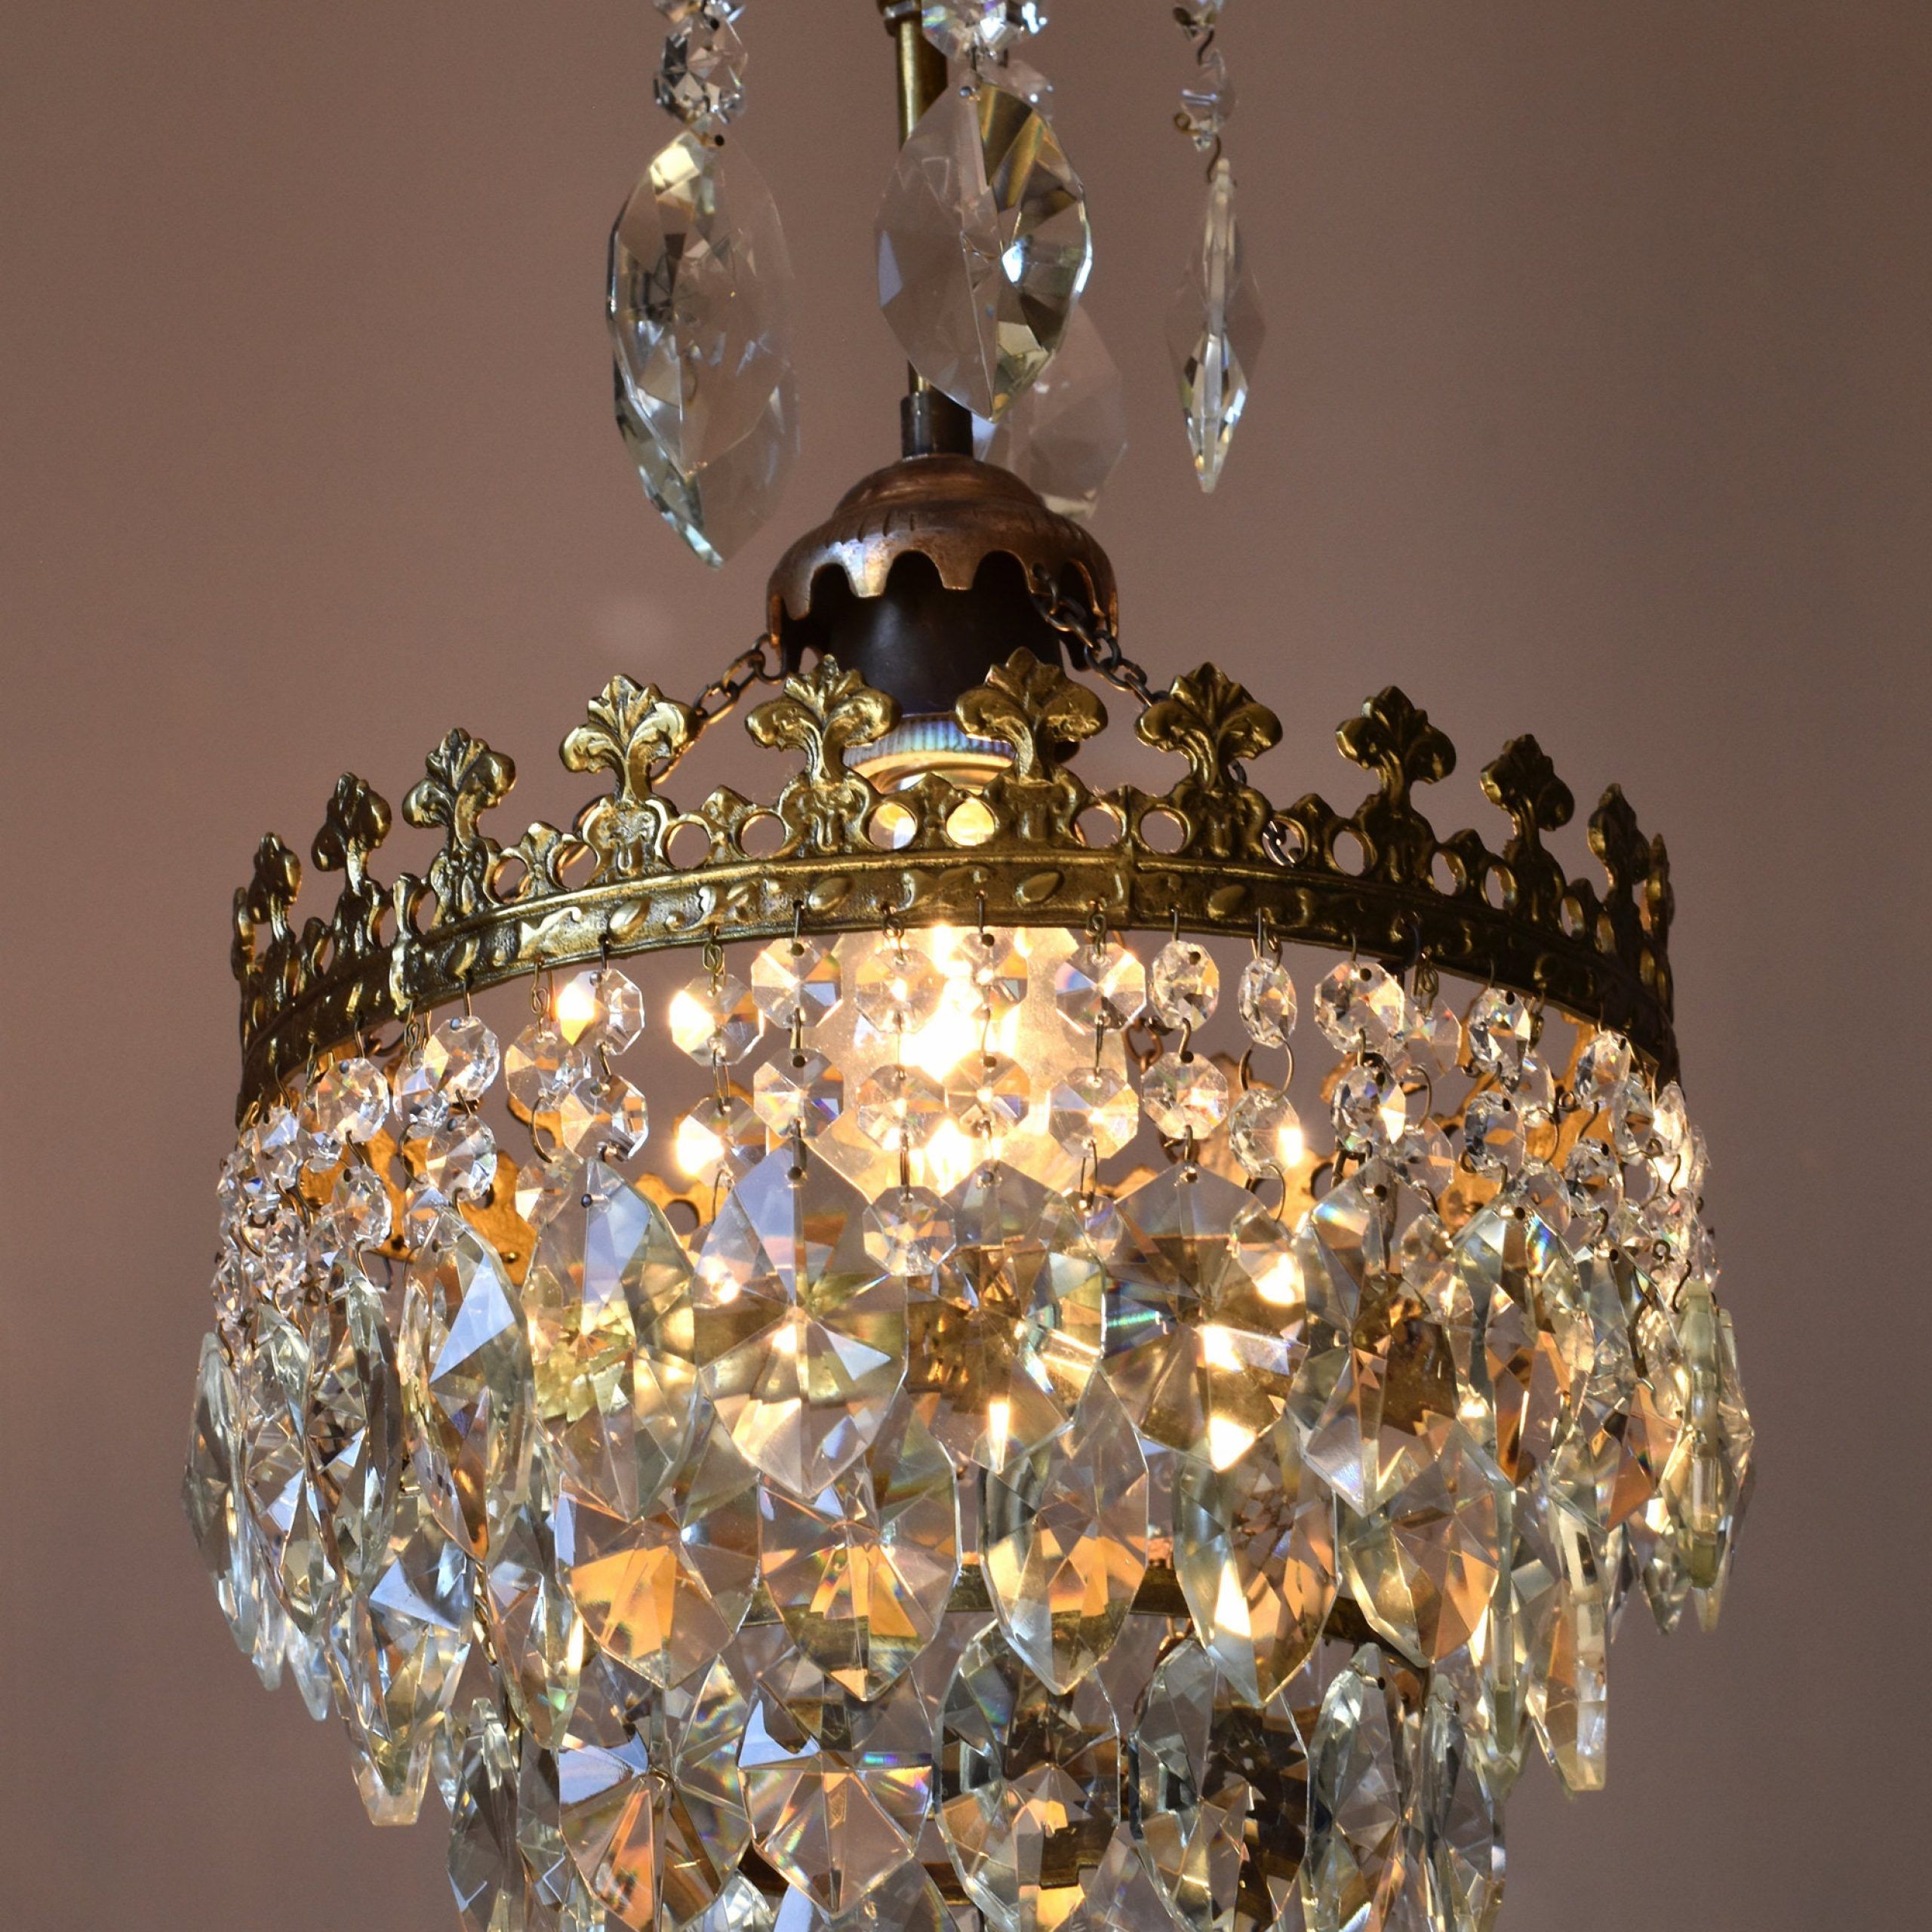 Antique & Vintage Brass Crystal Chandelier, Petite Ceiling Inside Antique Brass Crystal Chandeliers (View 5 of 15)